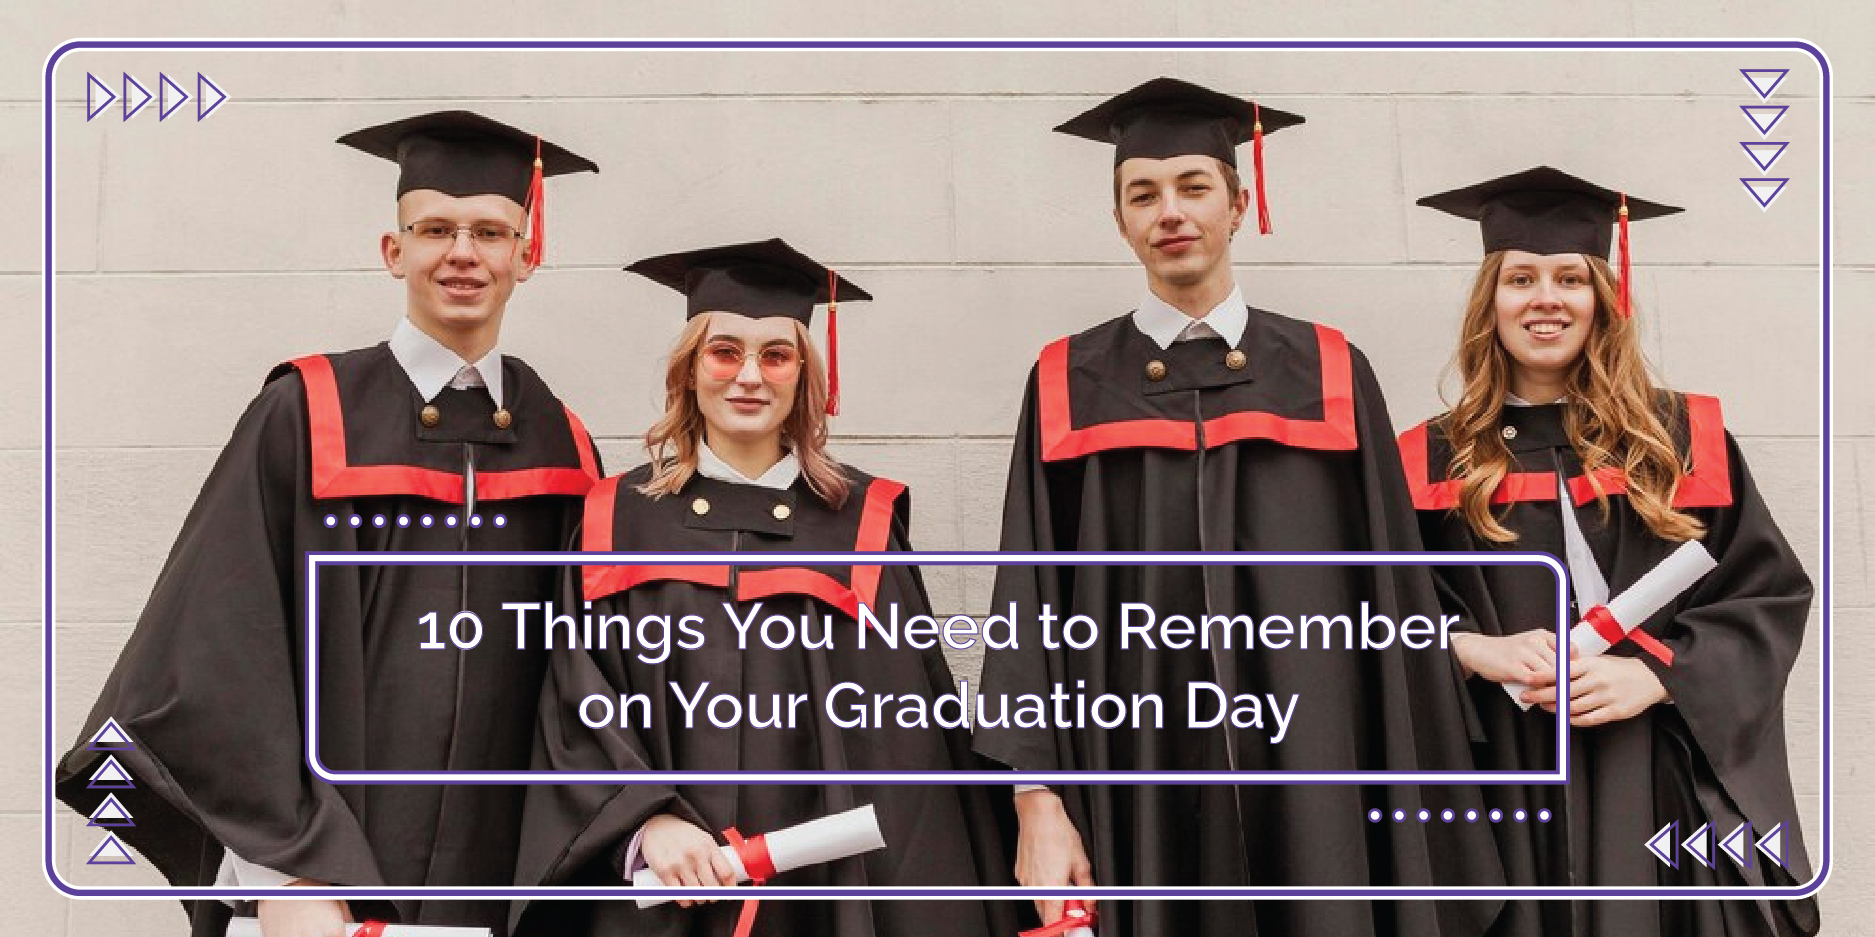 10 Things You Need to Remember on Your Graduation Day